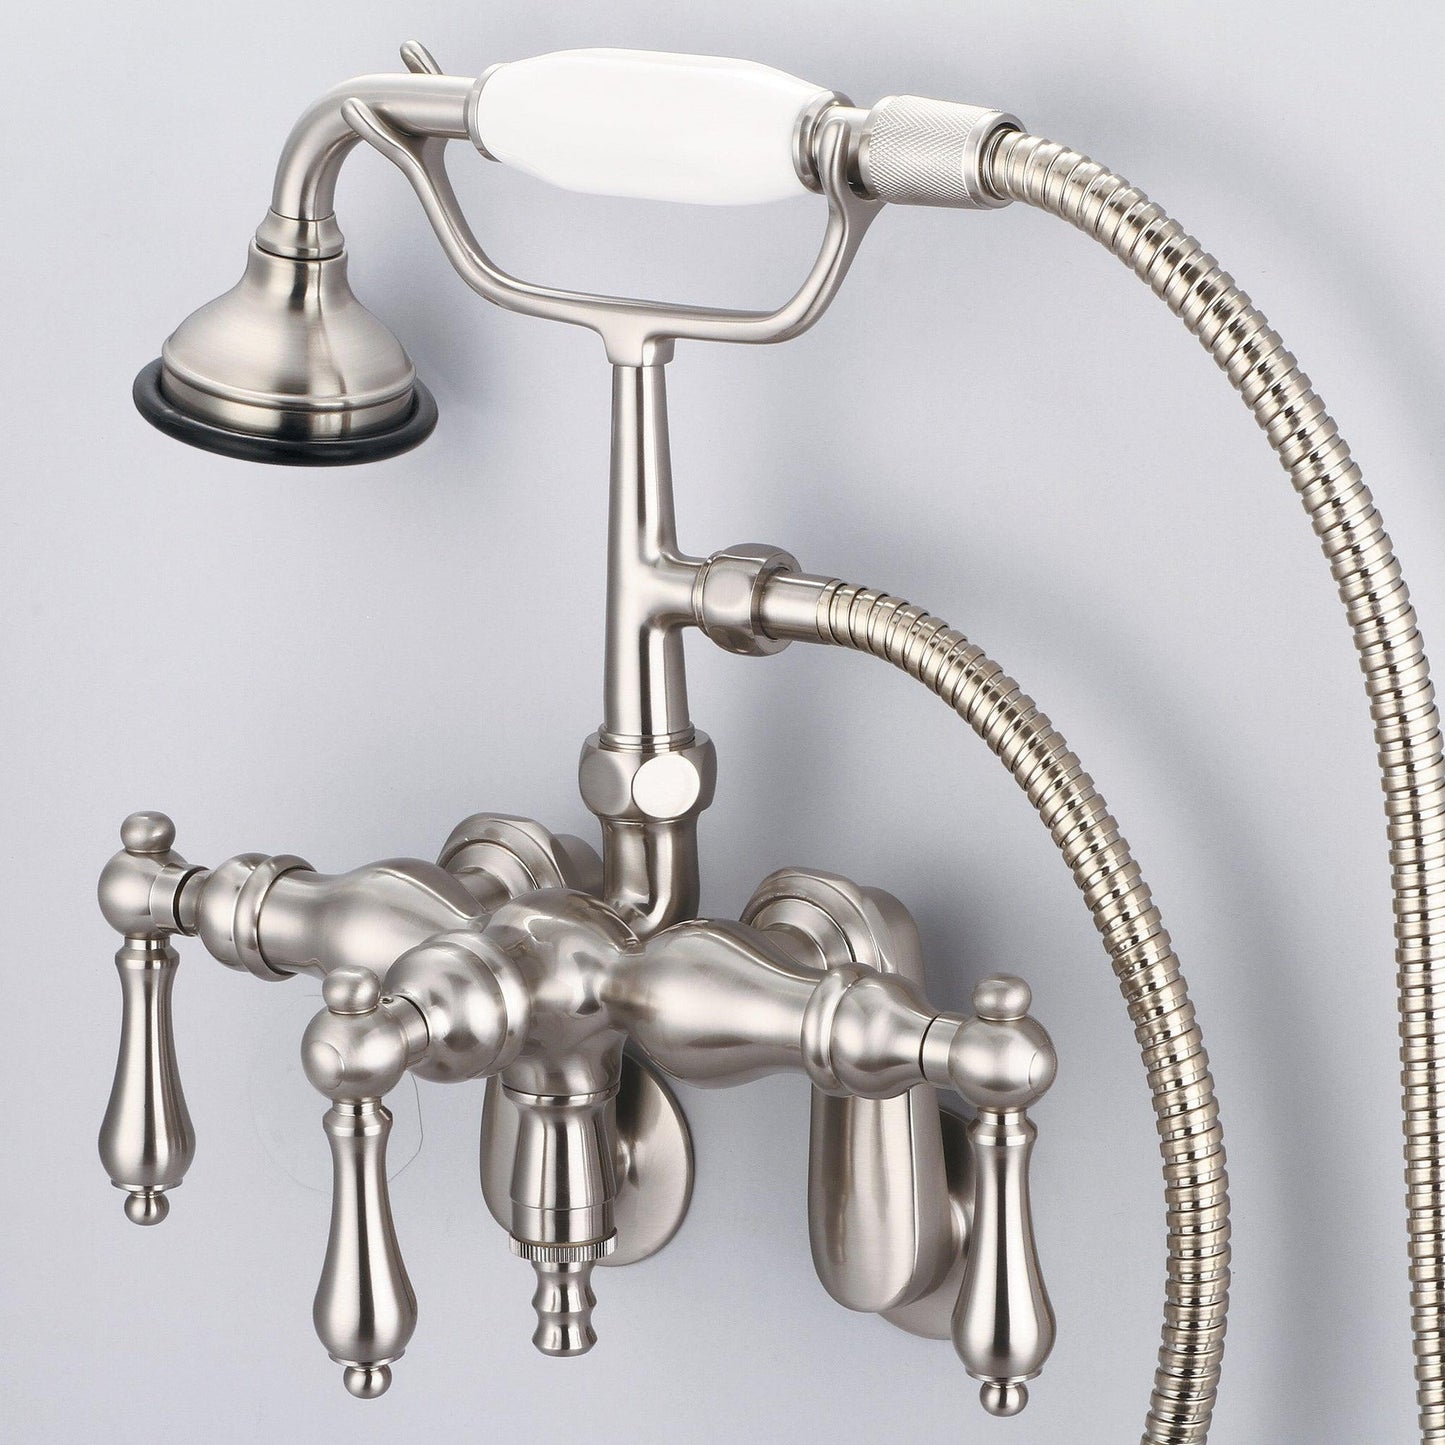 Water Creation Vintage Classic Center Wall Mount Tub F6-0018 9.25" Grey Solid Brass Faucet With Down Spout, Swivel Wall Connector And Handheld Shower And Metal Lever Handles Without Labels